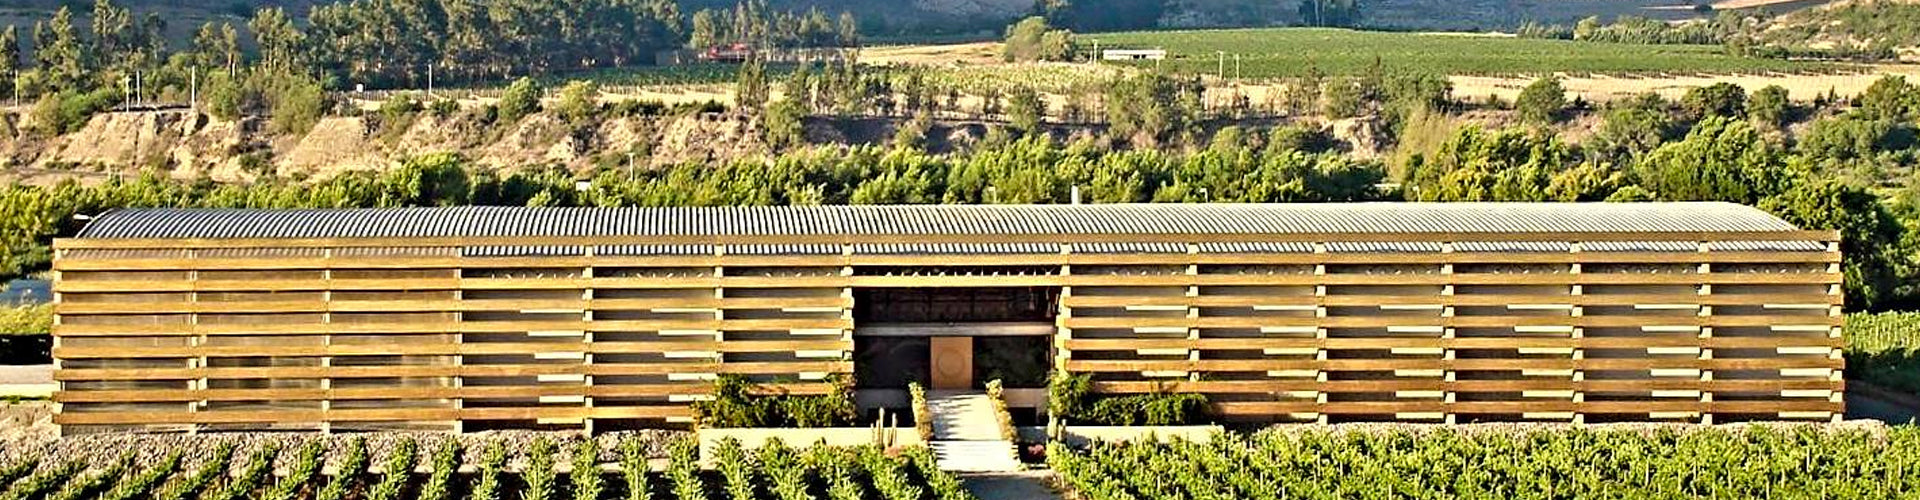 Viña Falernia Winery Building in the Elqui Valley